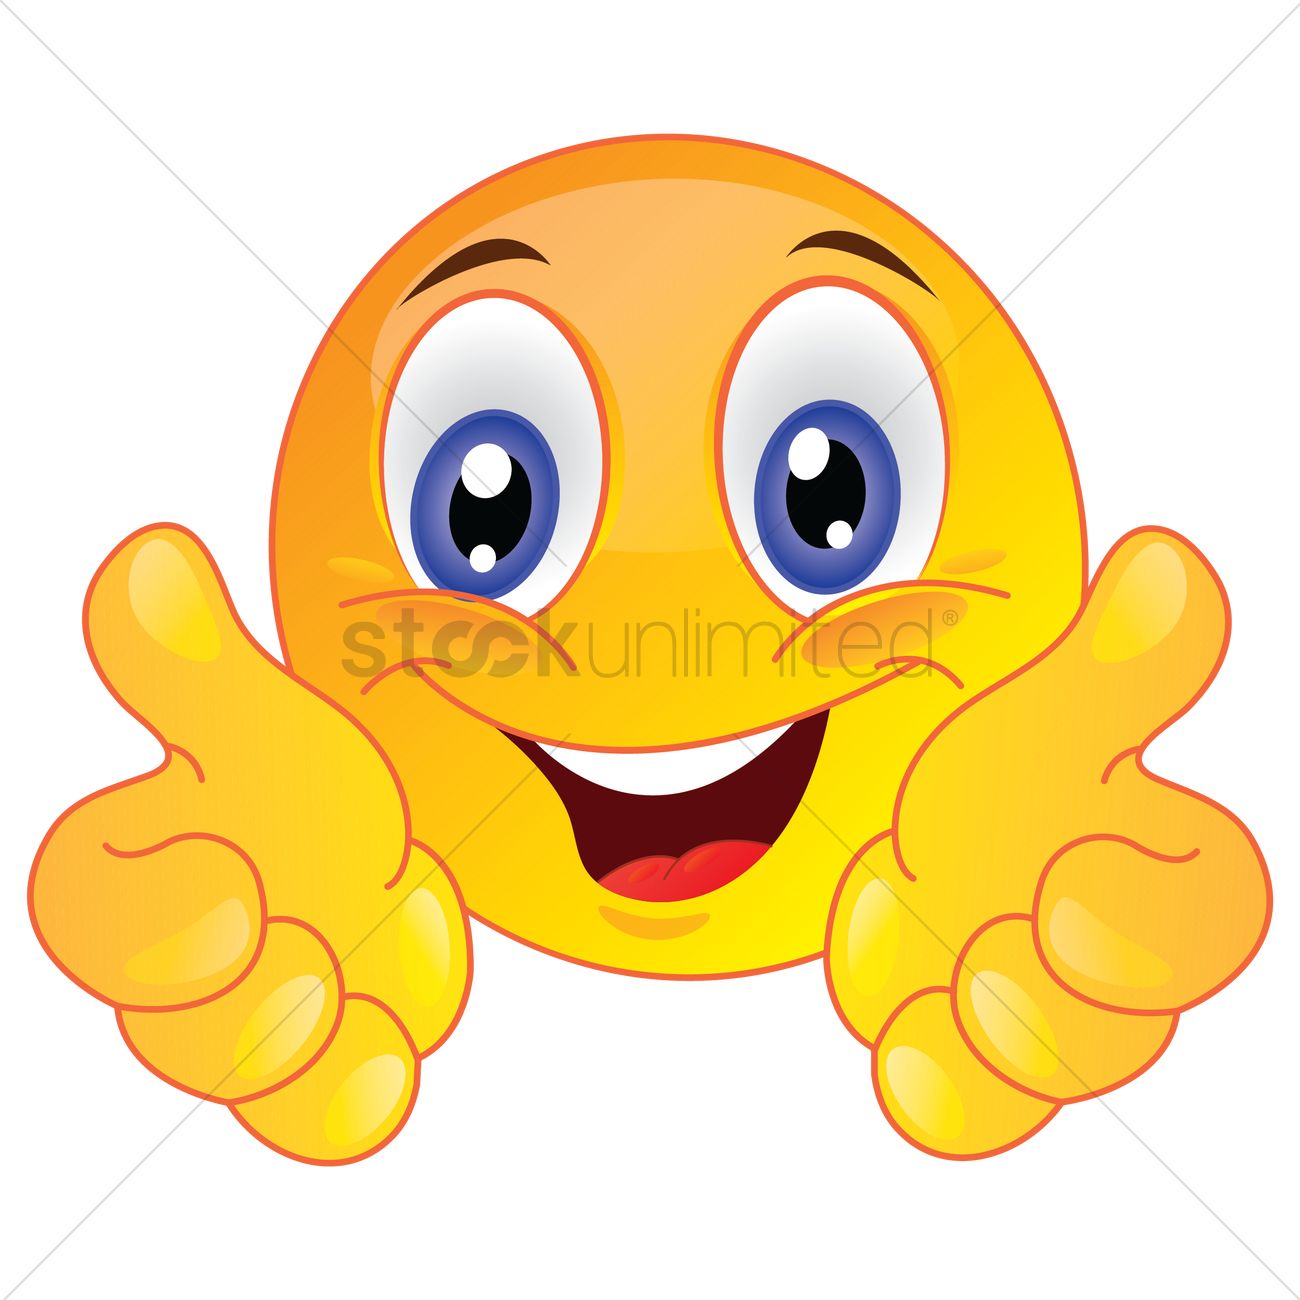 Smiley face showing thumbs up Vector Image